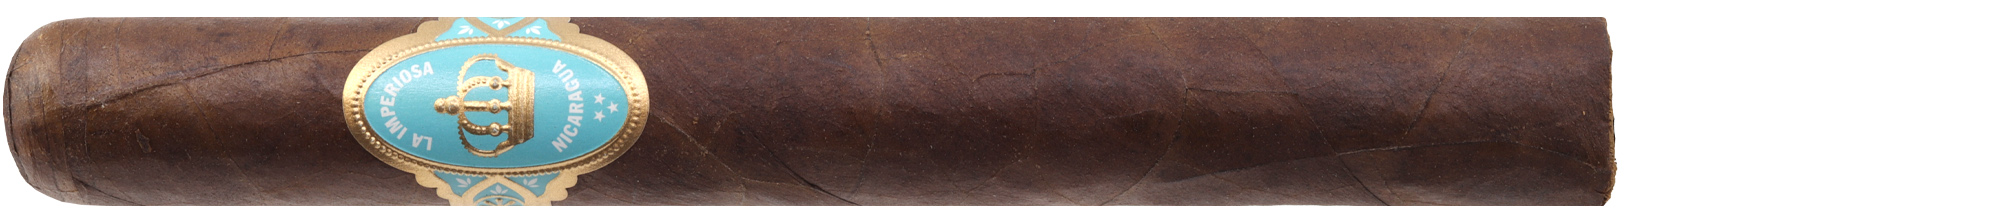 Crowned Heads La Imperiosa Double Robusto
